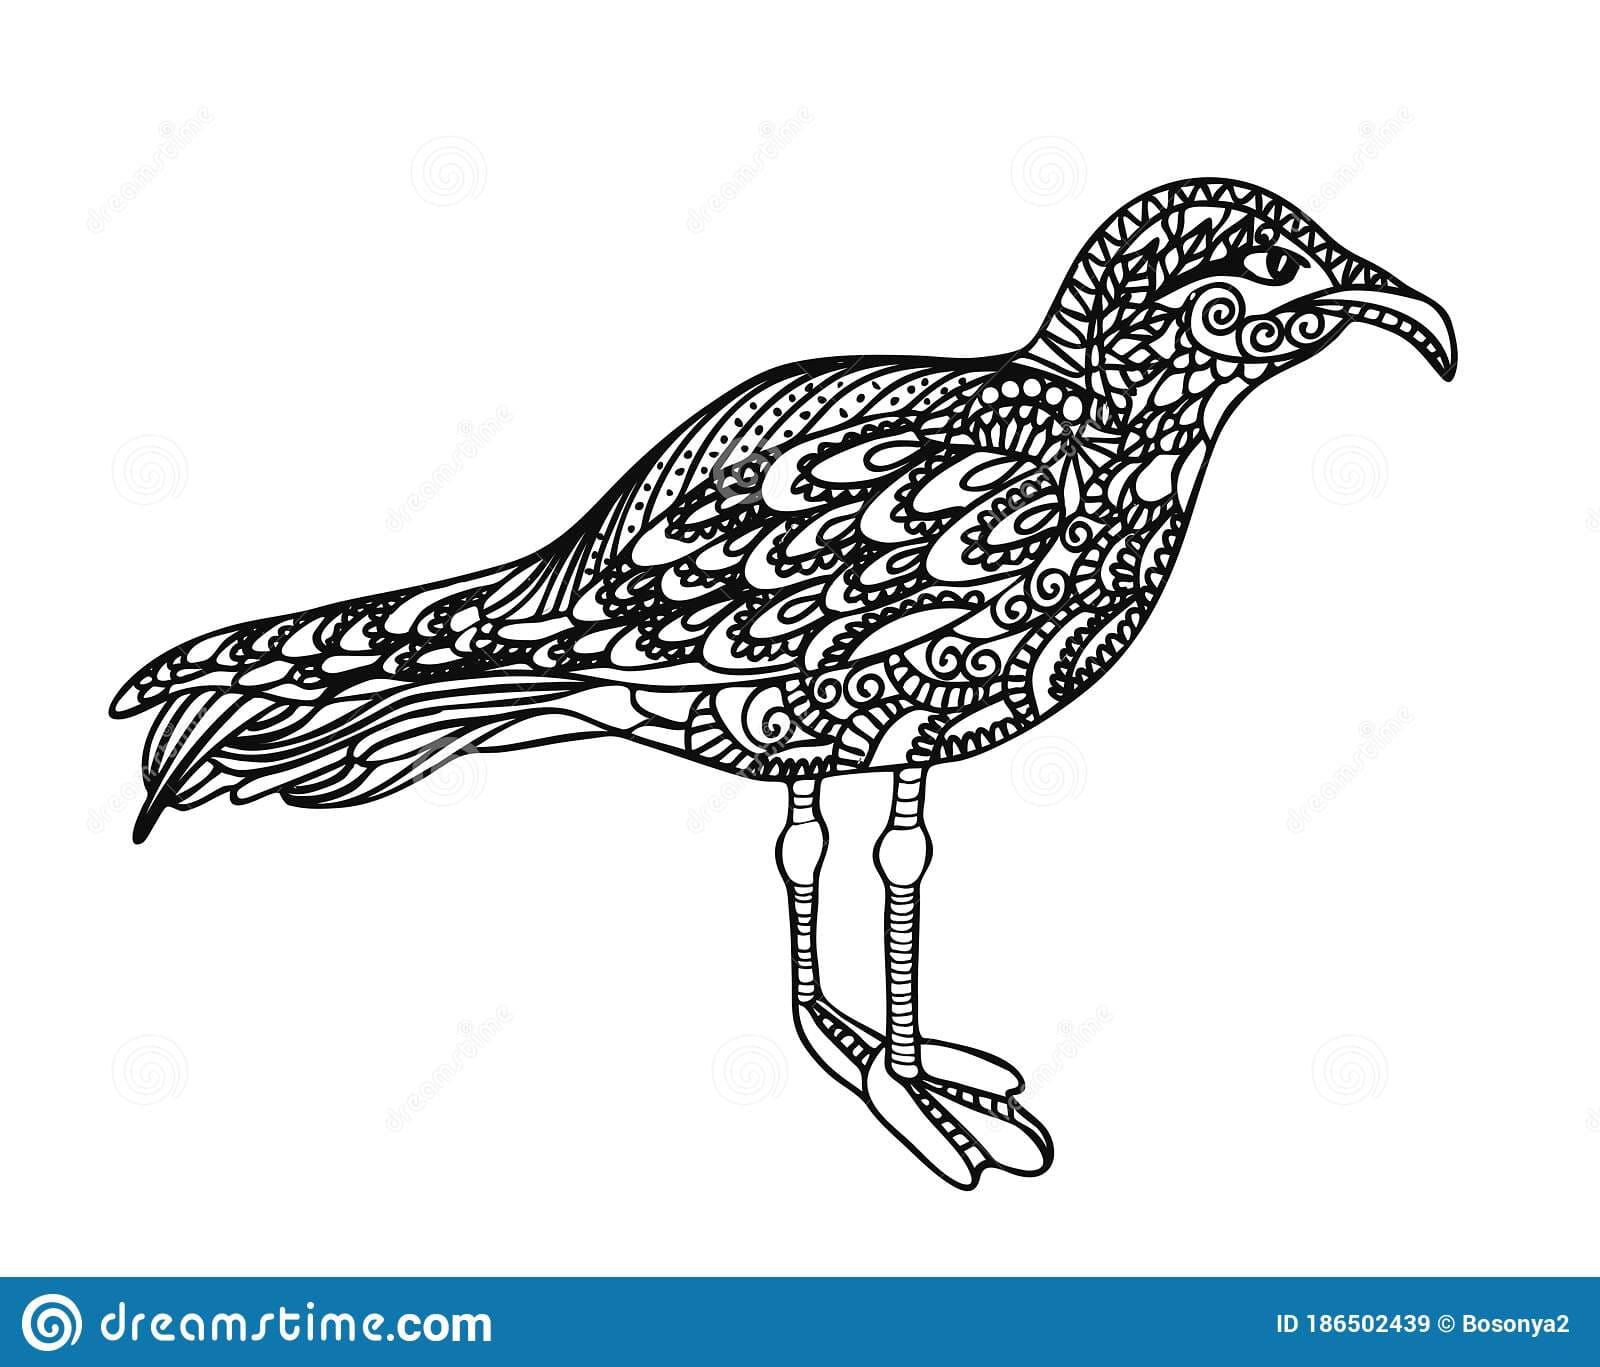 The Bird Is Black And White Image